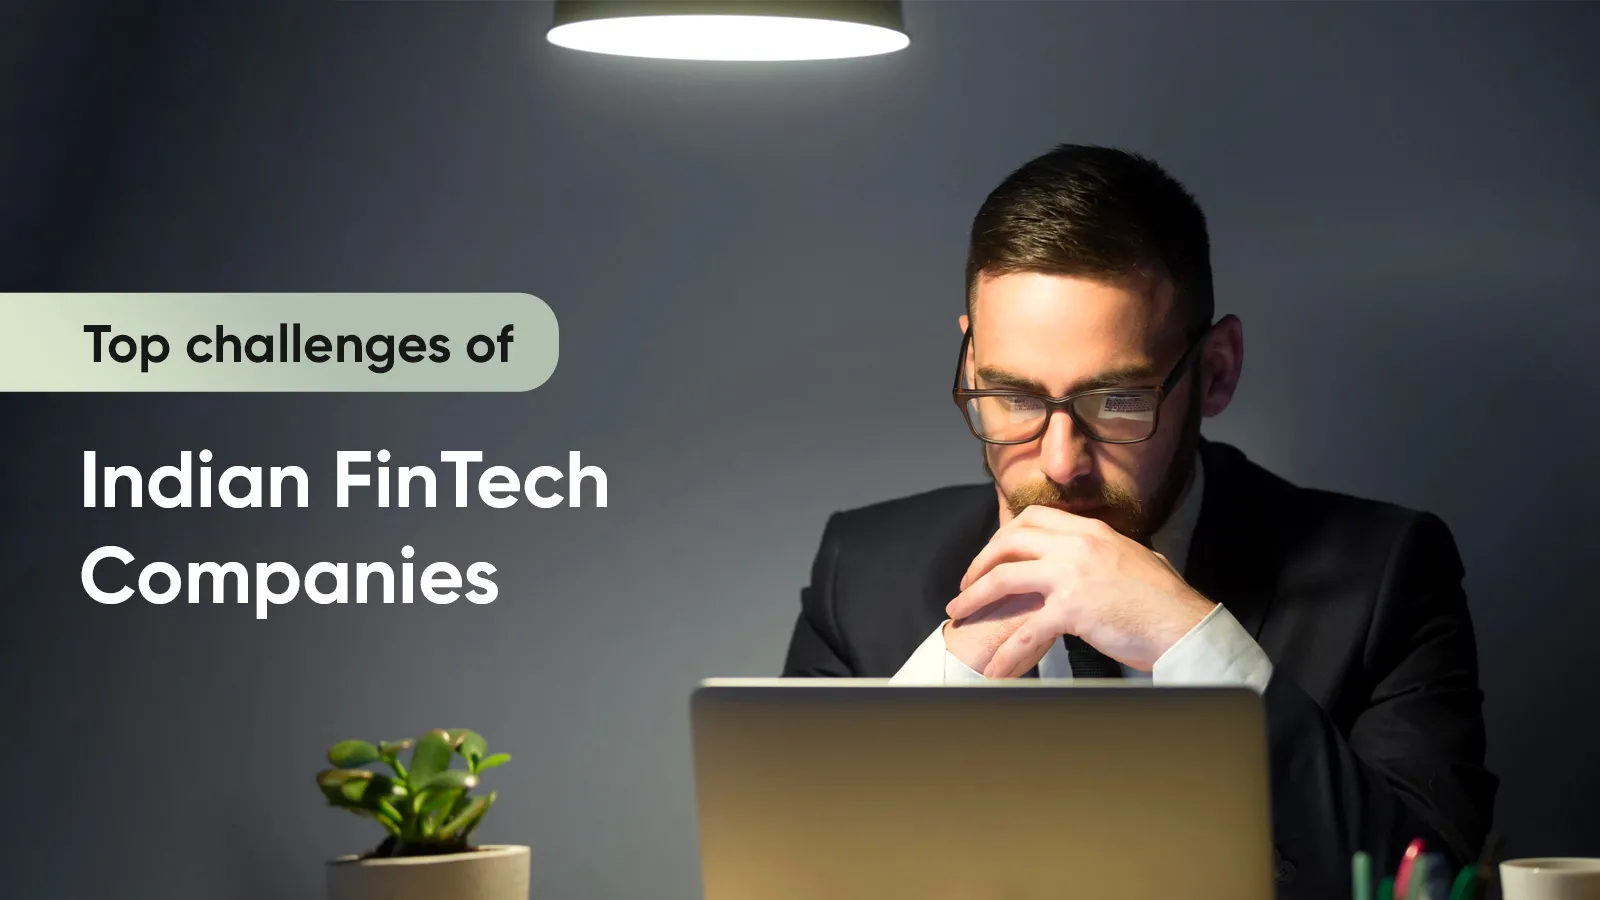 Top challenges of Indian FinTech Companies